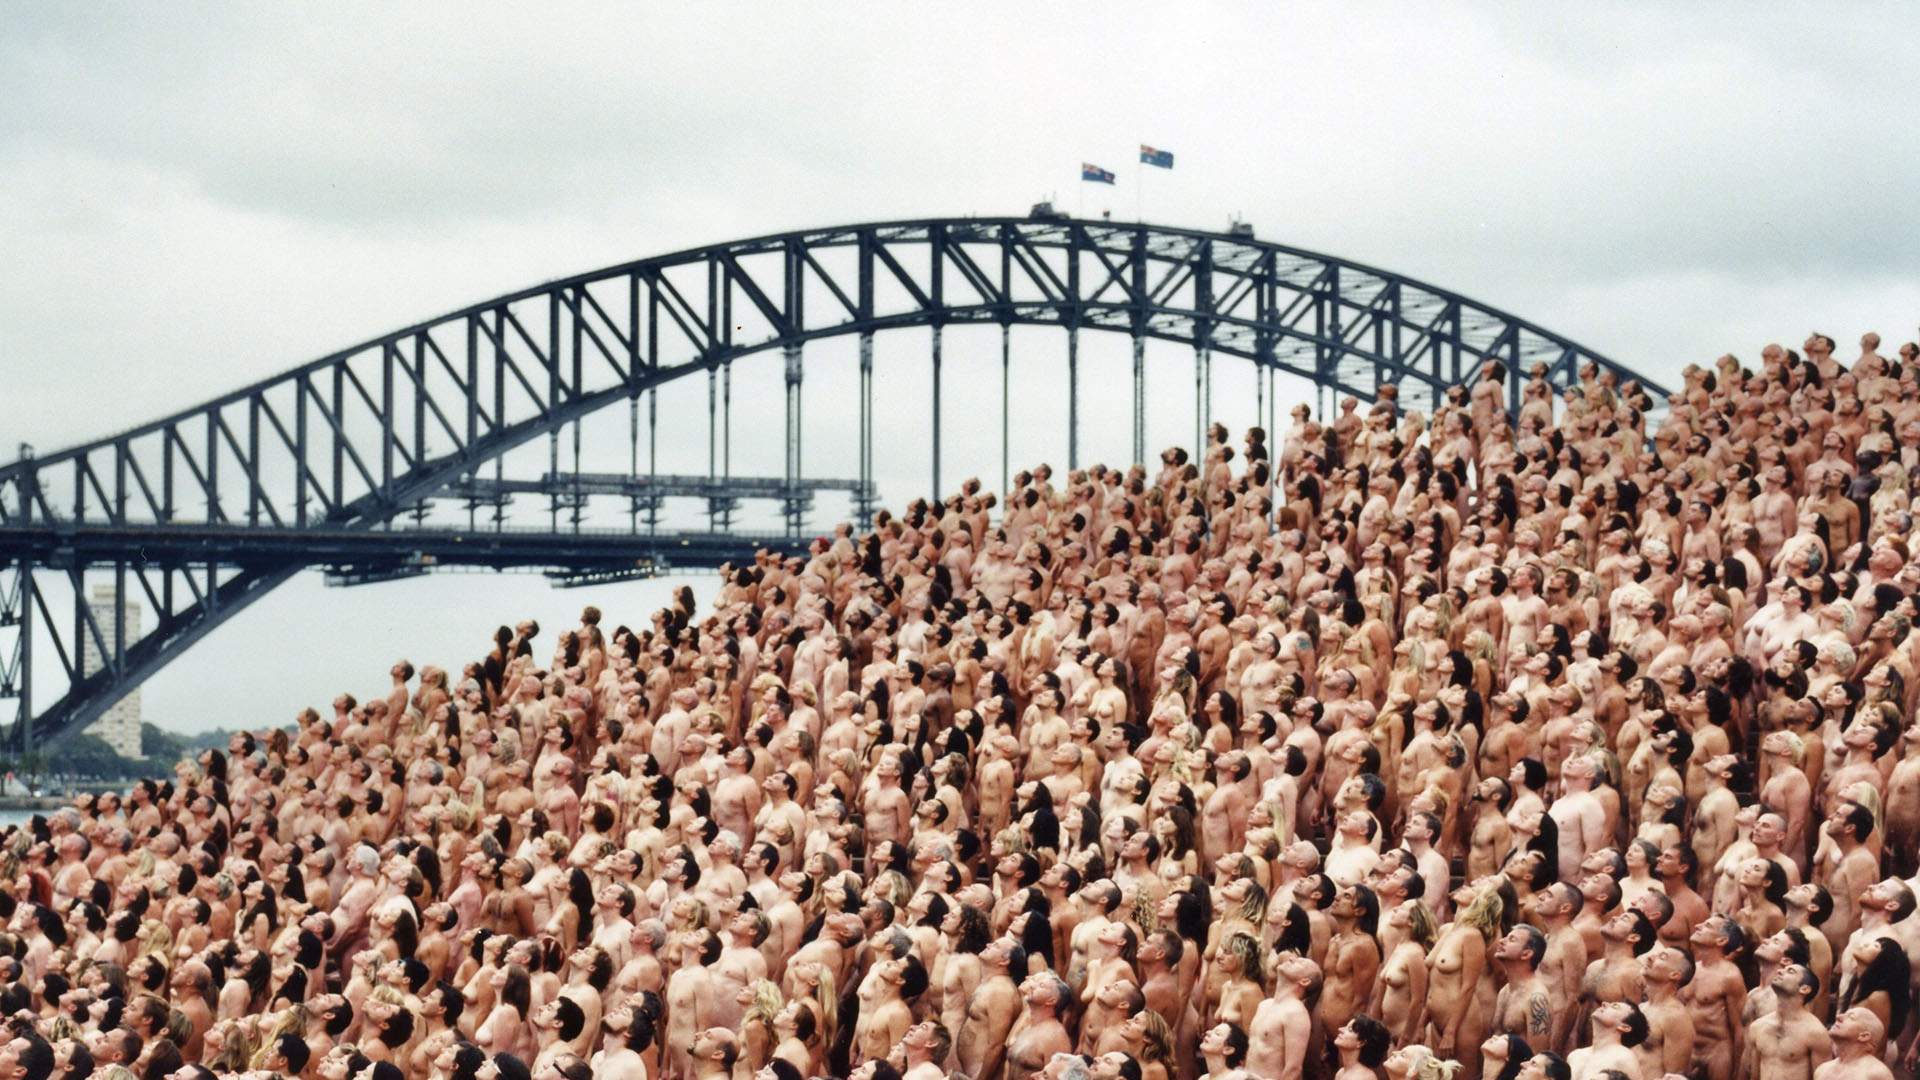 Artist Spencer Tunick Is Staging a New Mass Nude Photography Work on a Sydney Beach